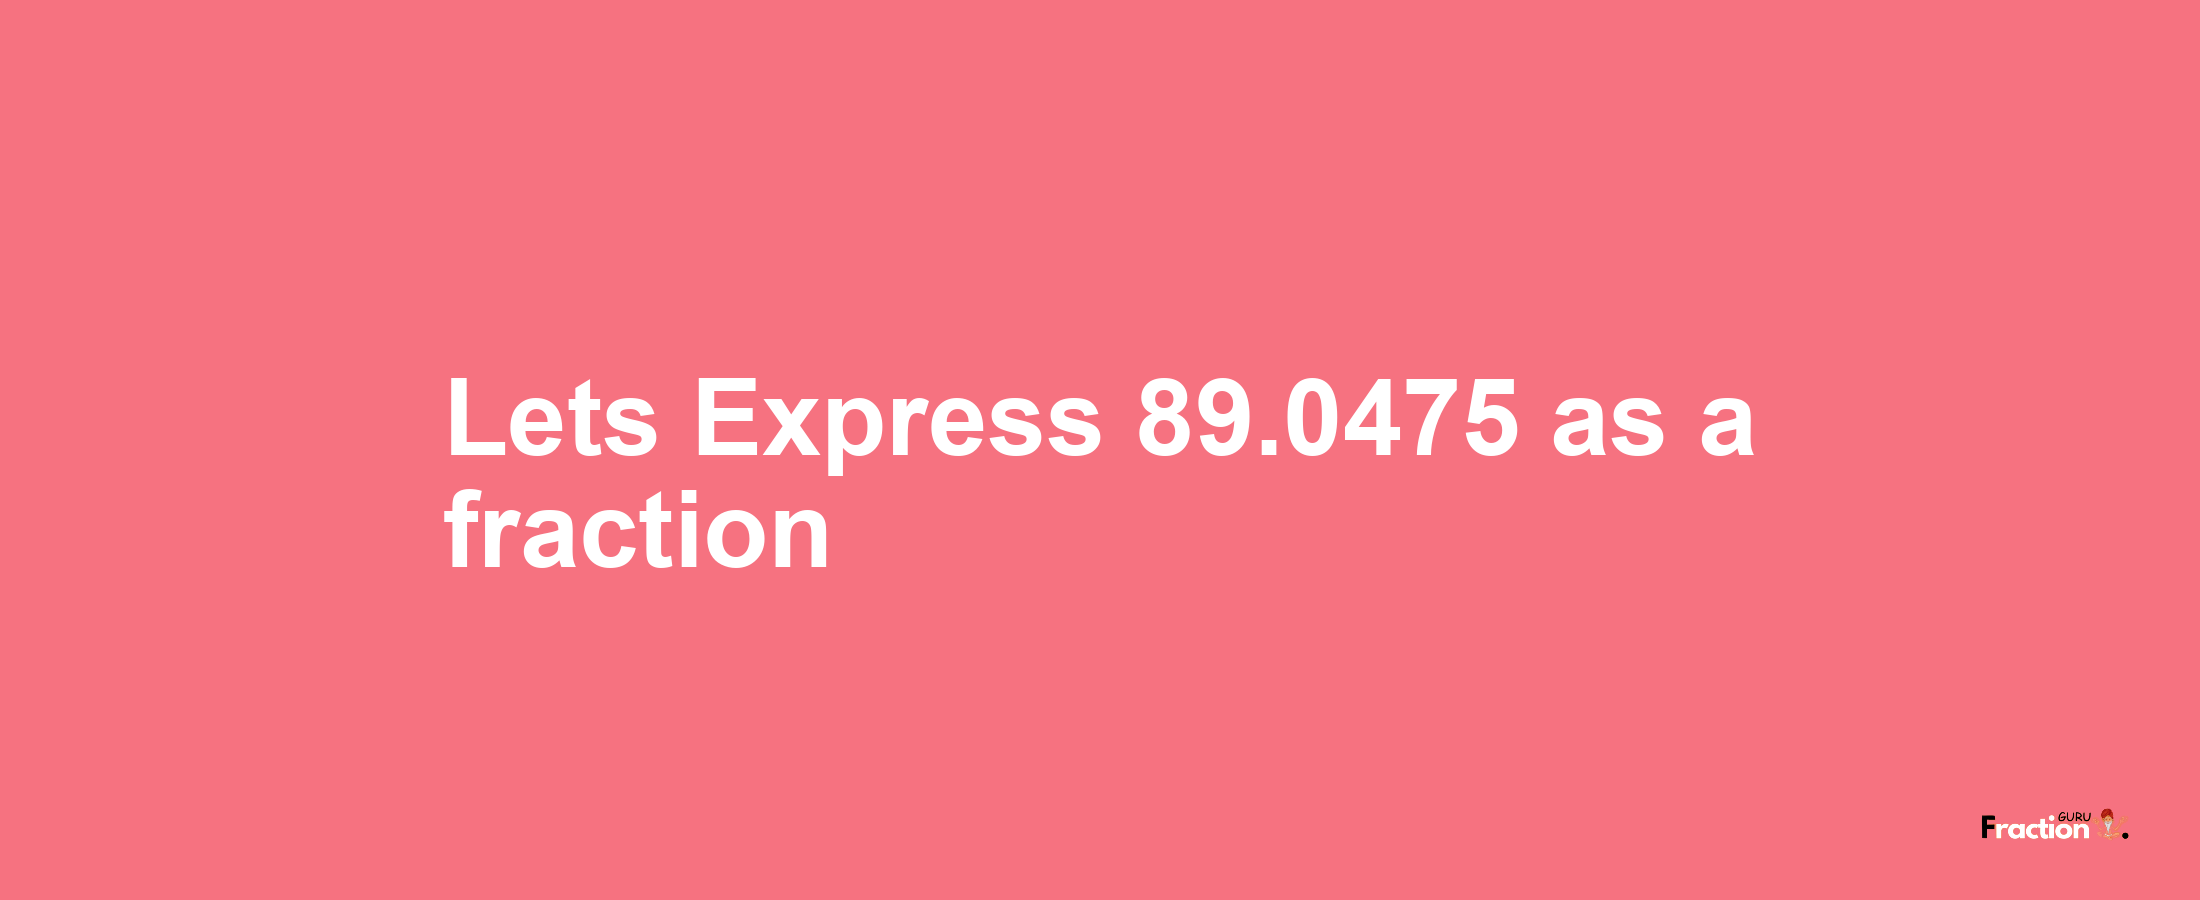 Lets Express 89.0475 as afraction